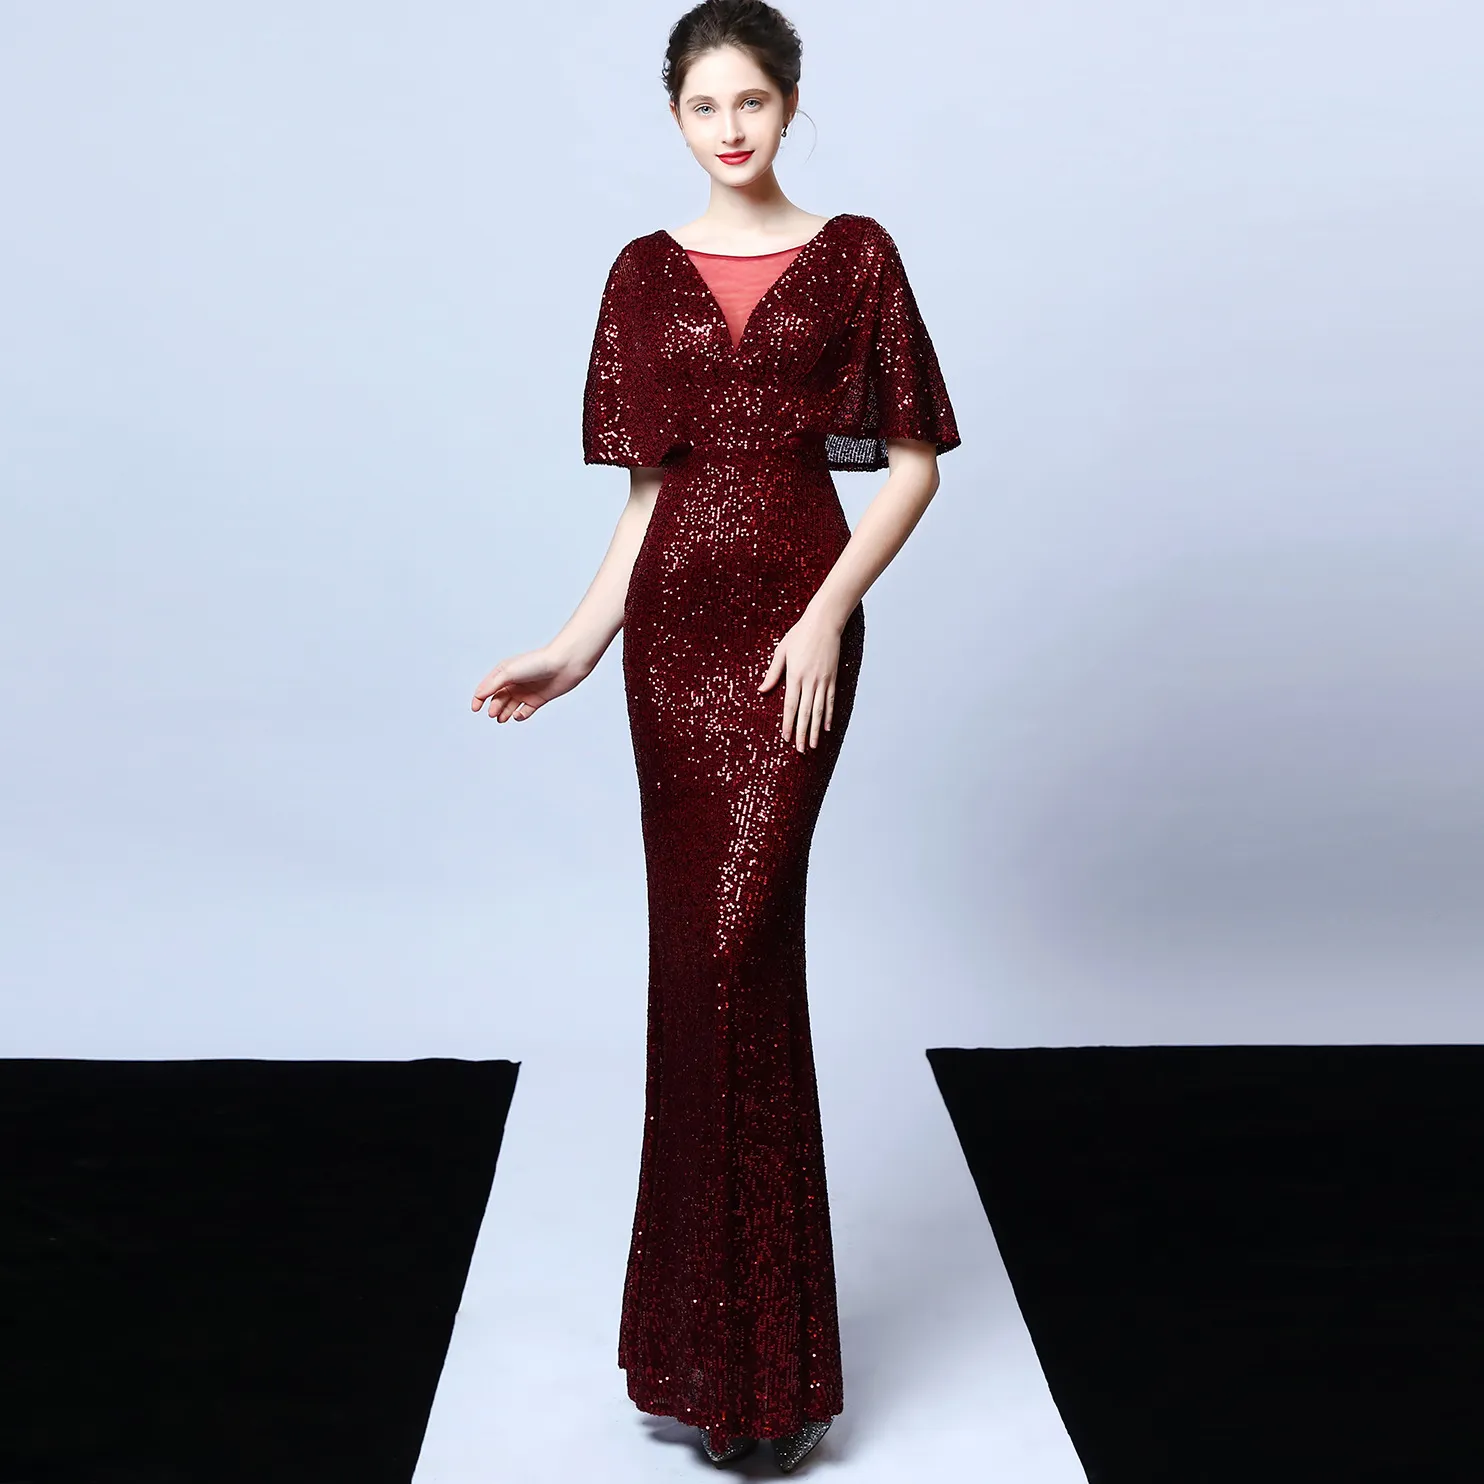 2021 Gold Evening Dresses Jewel Neck Beaded Sequined Lace Long Sleeve Mermaid Prom Dress Sweep Train Custom Illusion Robes De Soir292S